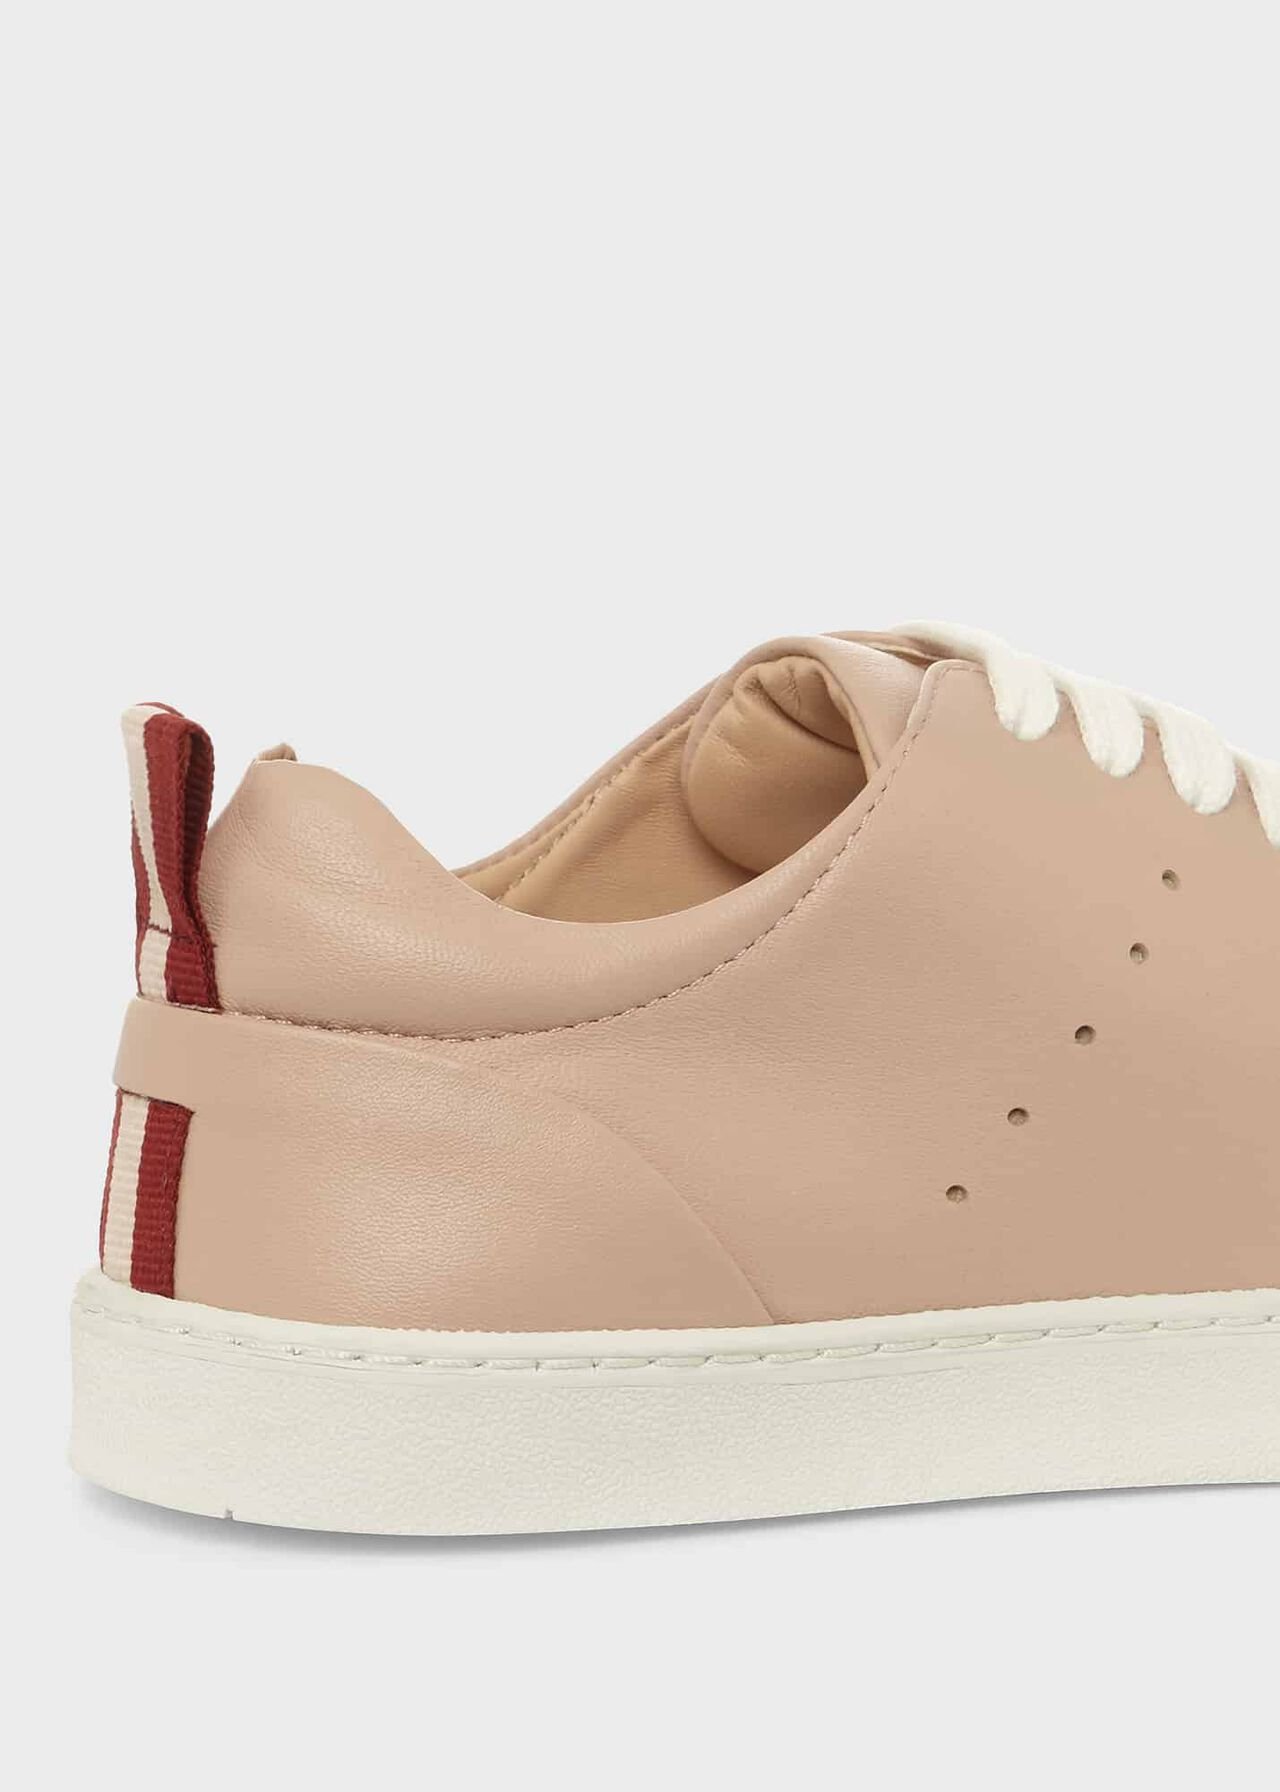 Liberty Leather Trainers, Pale Pink, hi-res